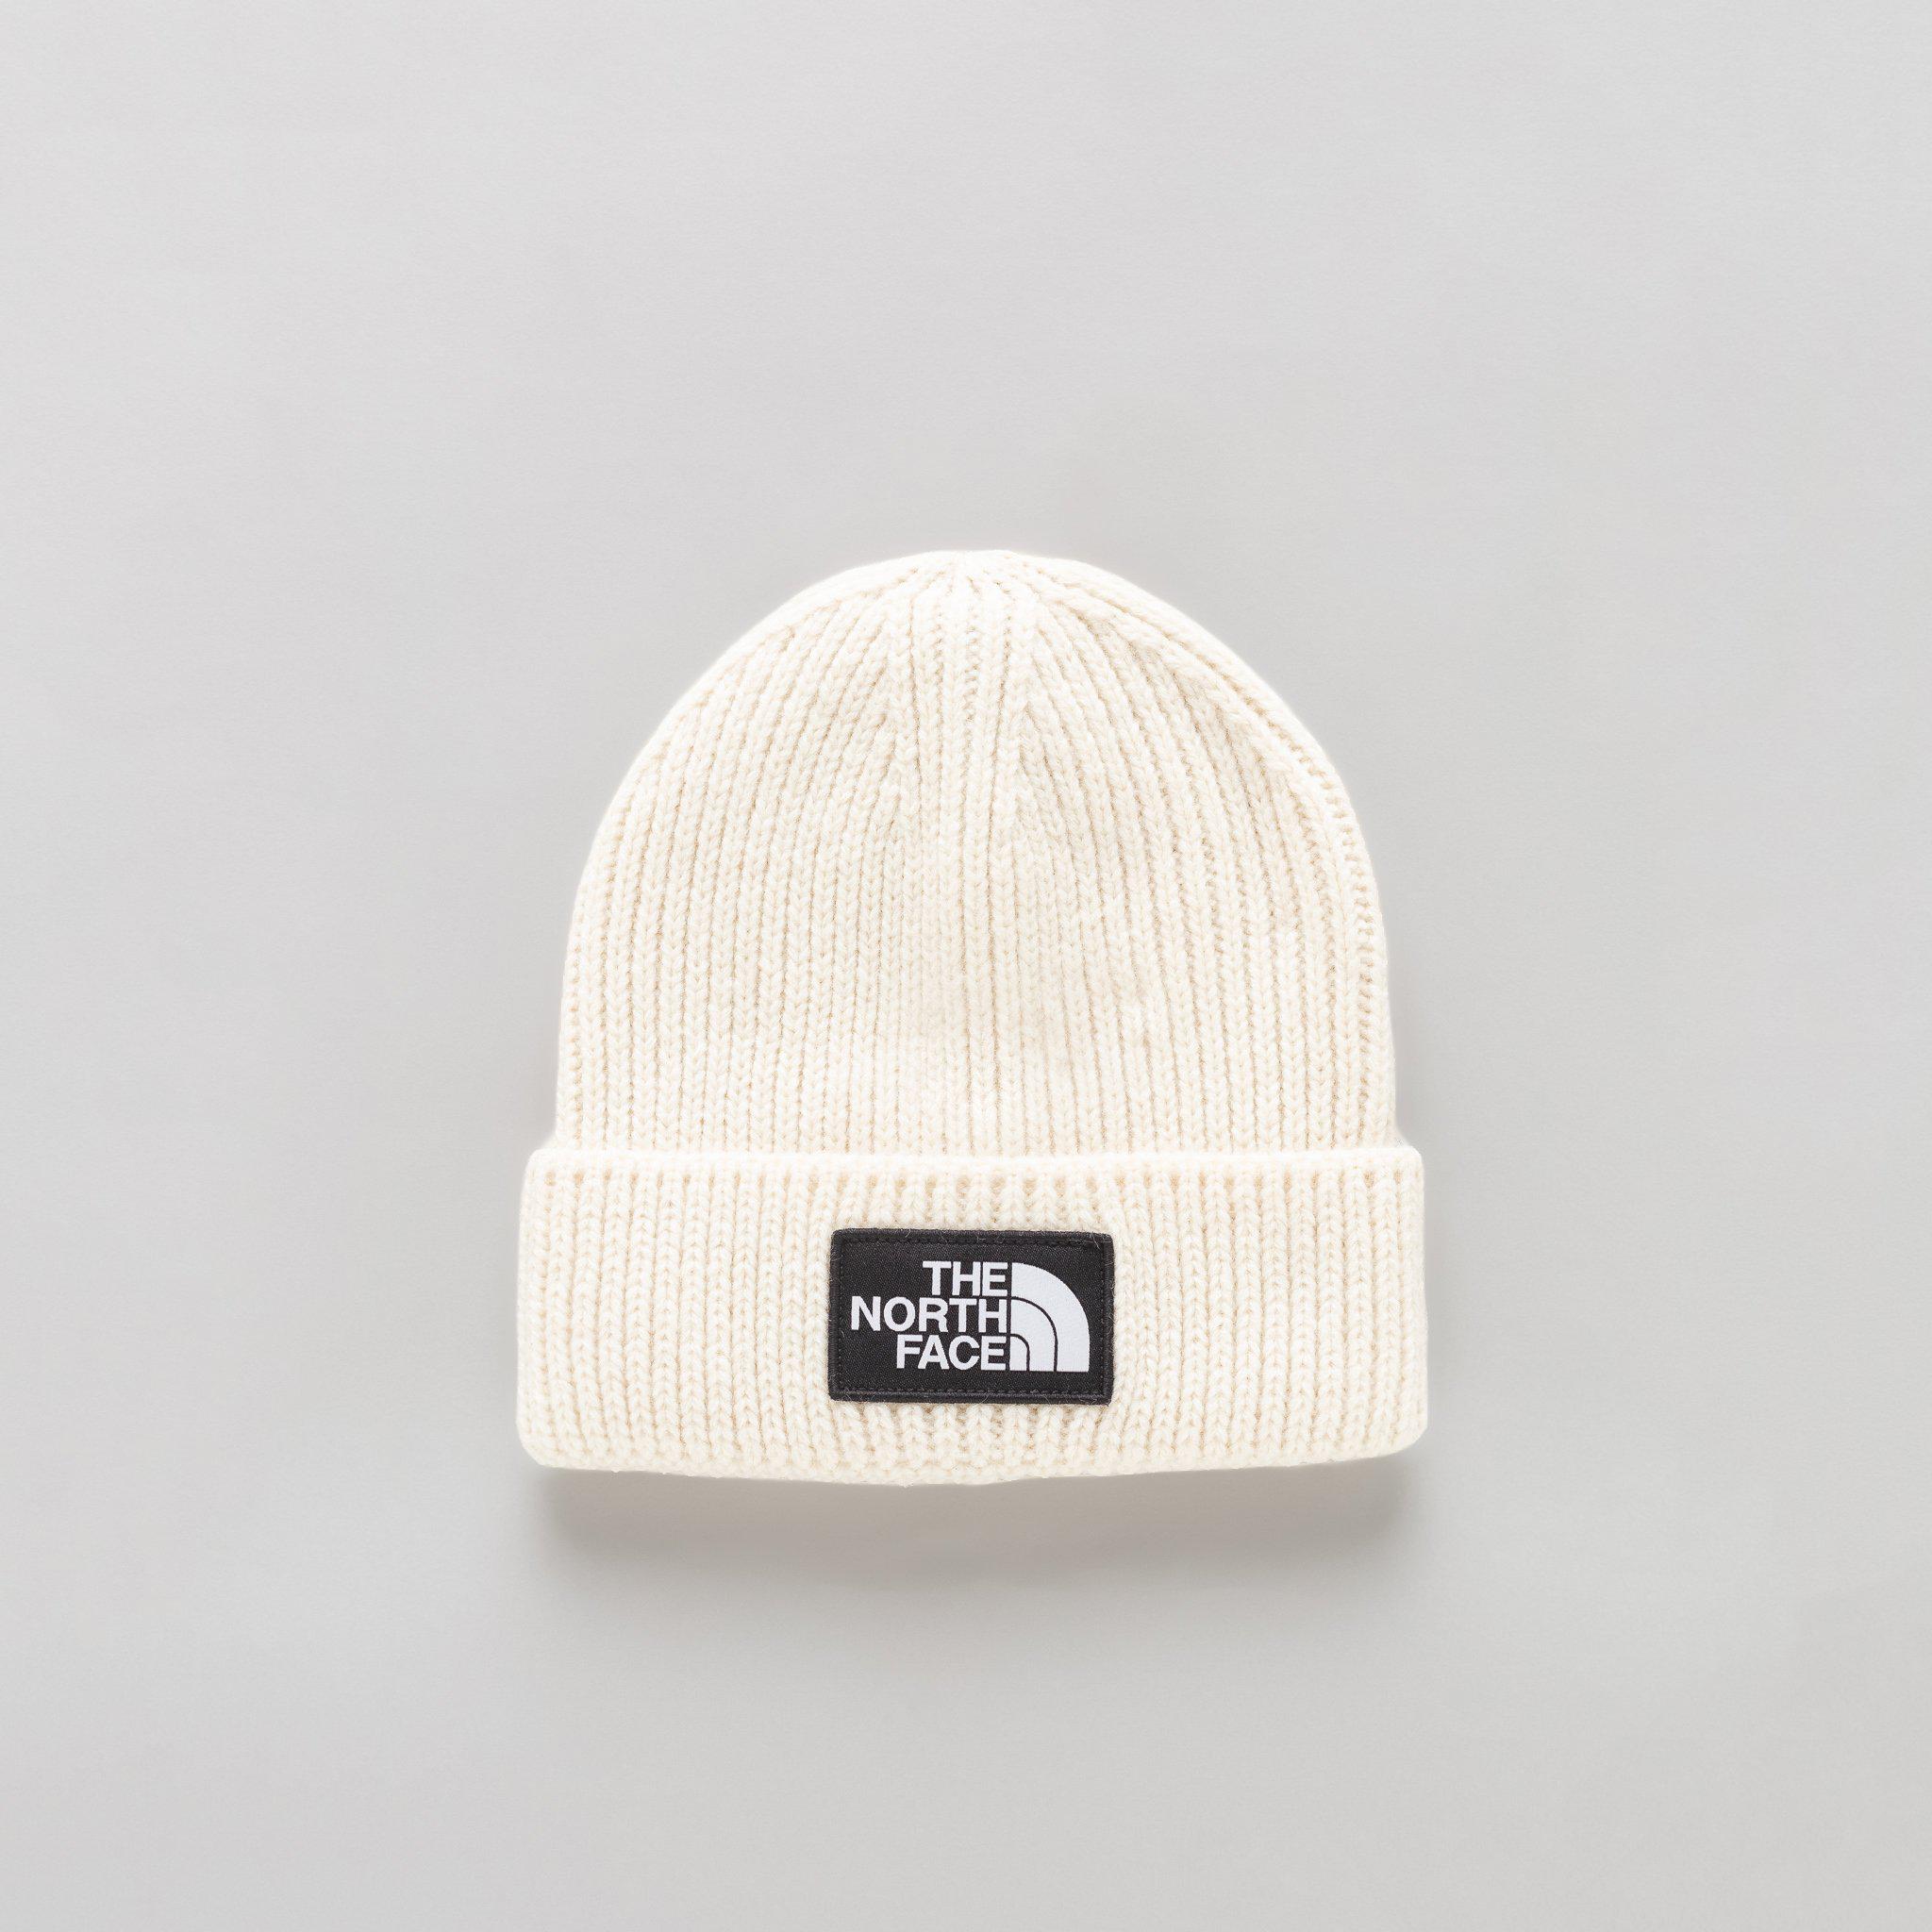 The North Face Synthetic Logo Box Cuffed Beanie Hat In White for Men - Lyst